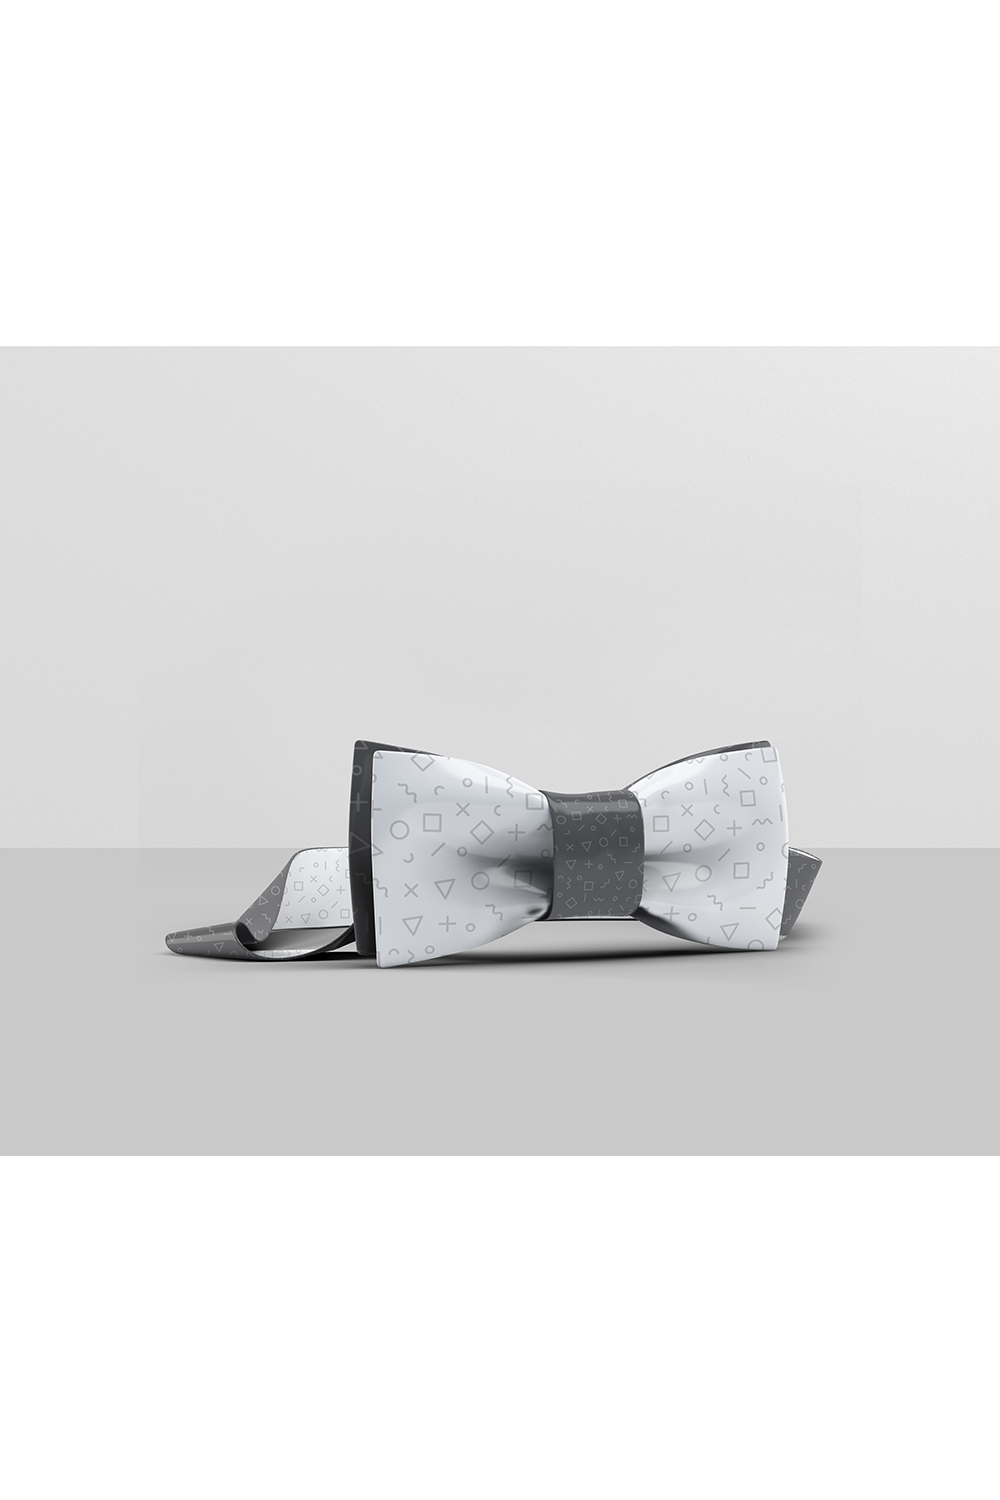 Realistic Bow Tie Mockup pinterest preview image.